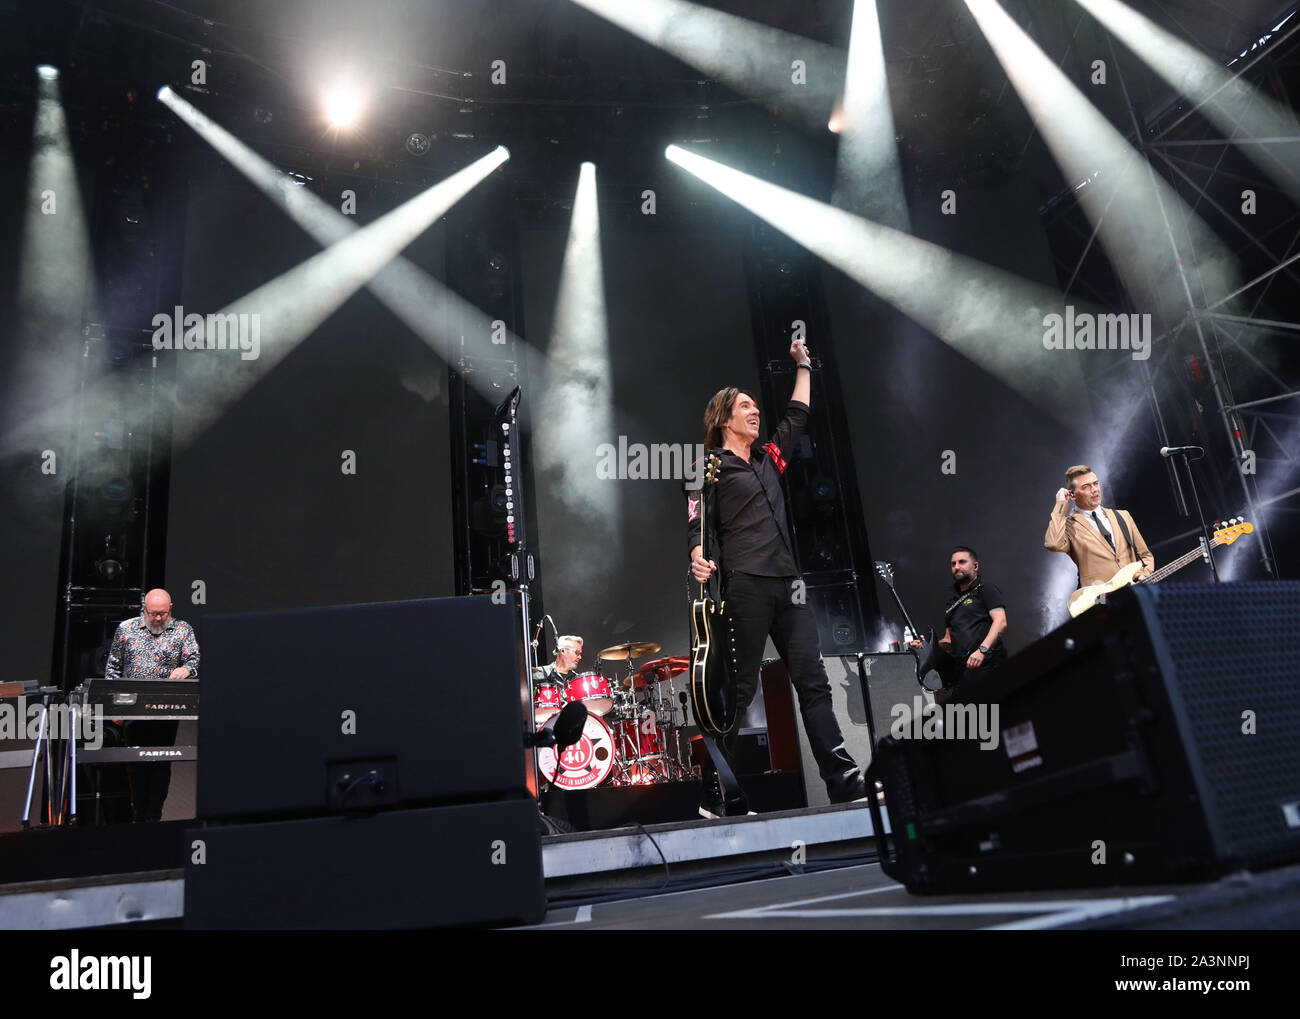 Page 3 - Per Gessle High Resolution Stock Photography and Images - Alamy